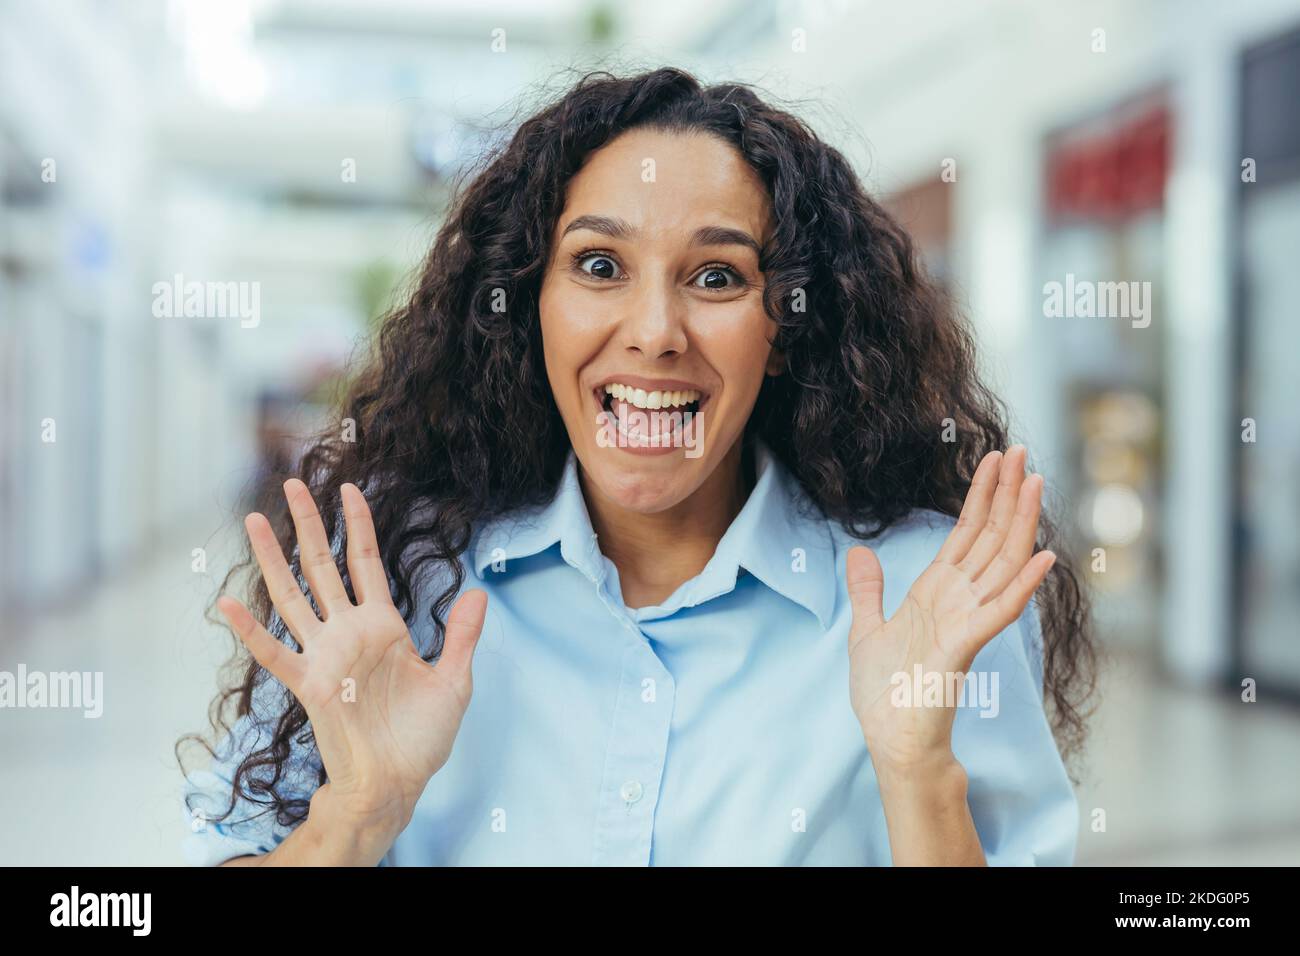 Close-up portrait of female shopper in beehive supermarket, Hispanic woman with curly hair looking at camera with smile. Stock Photo